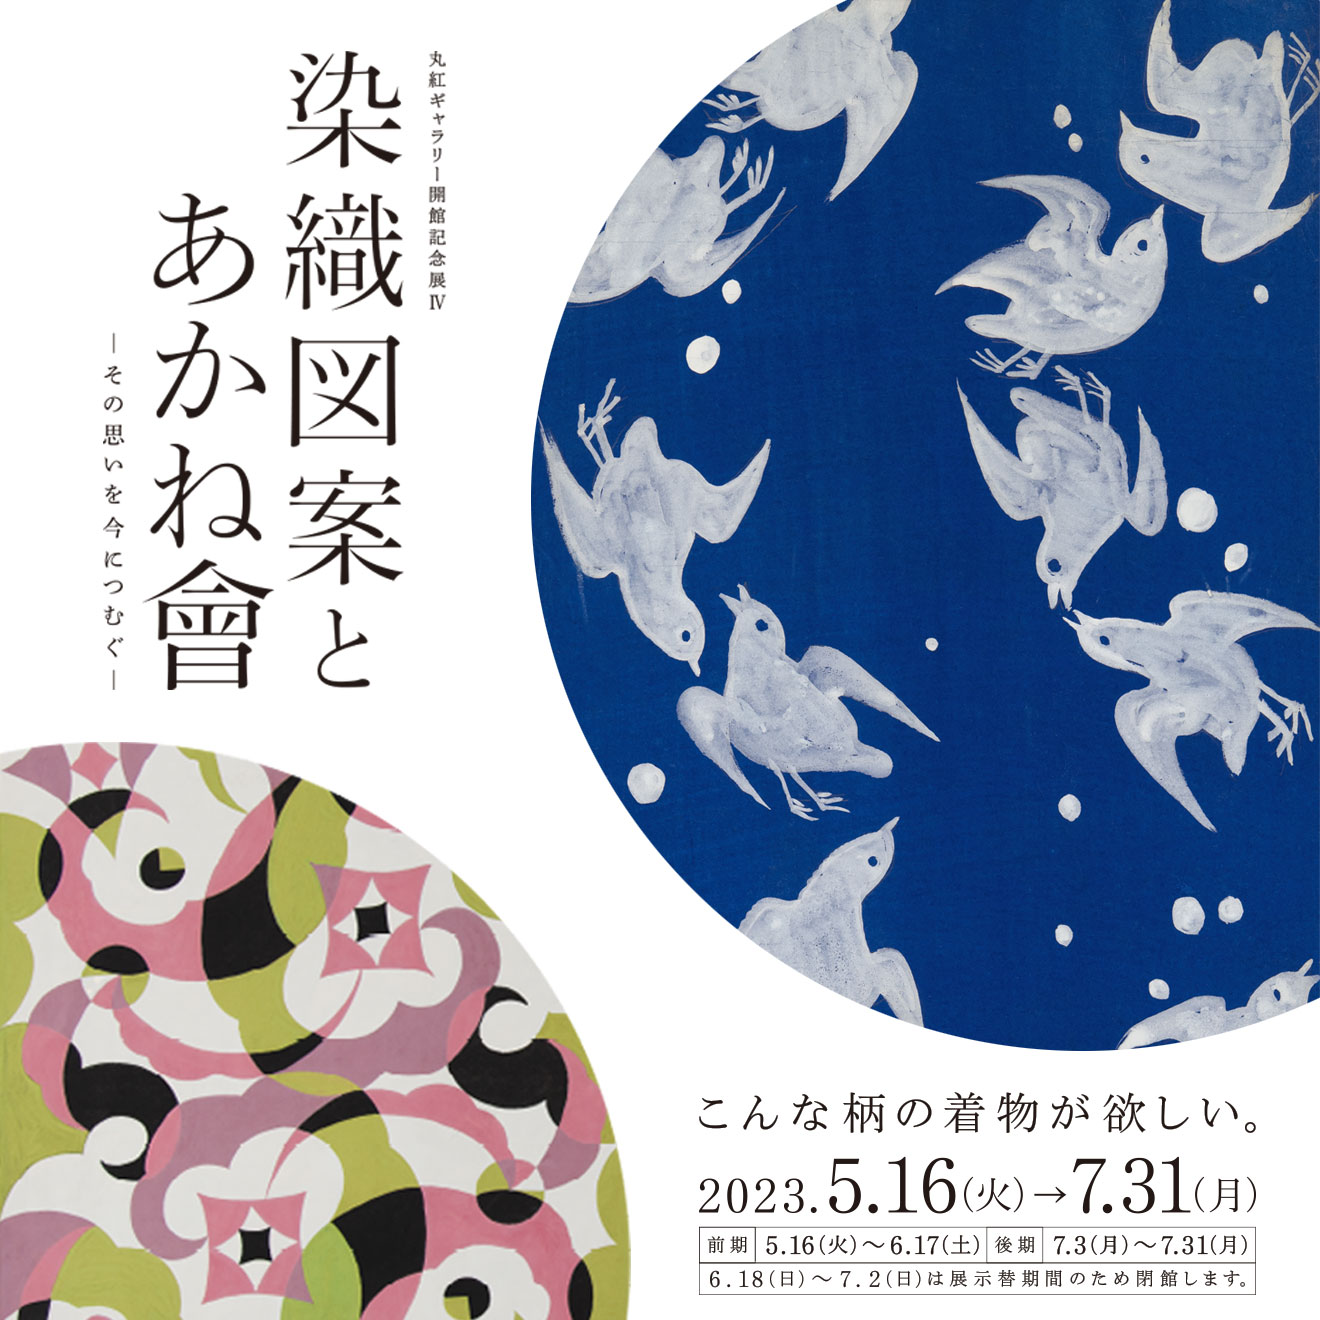 Marubeni Gallery Opening Exhibition IV Textile Designs and the Akane-kai— Spinning the Passion of the Past into the Present